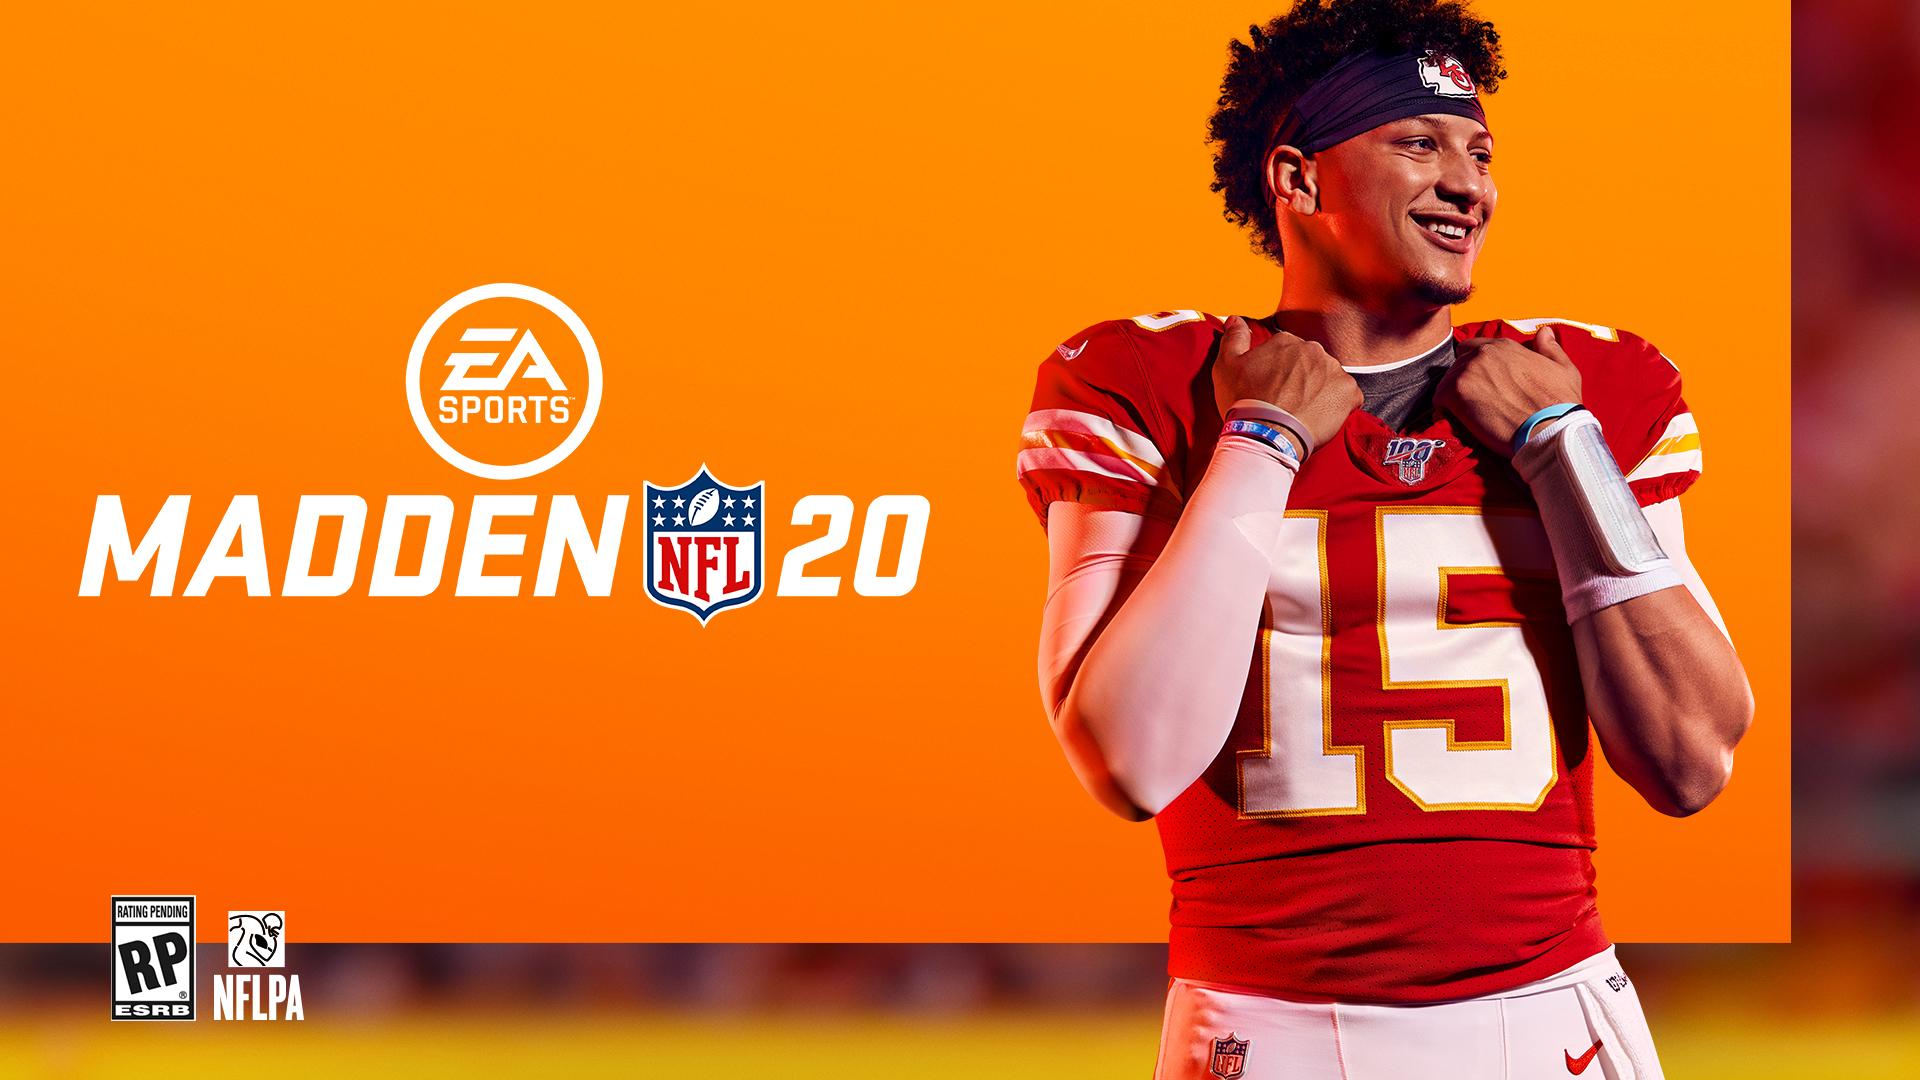 Madden 20 Sales Were August's Most Downloaded PS4 Game